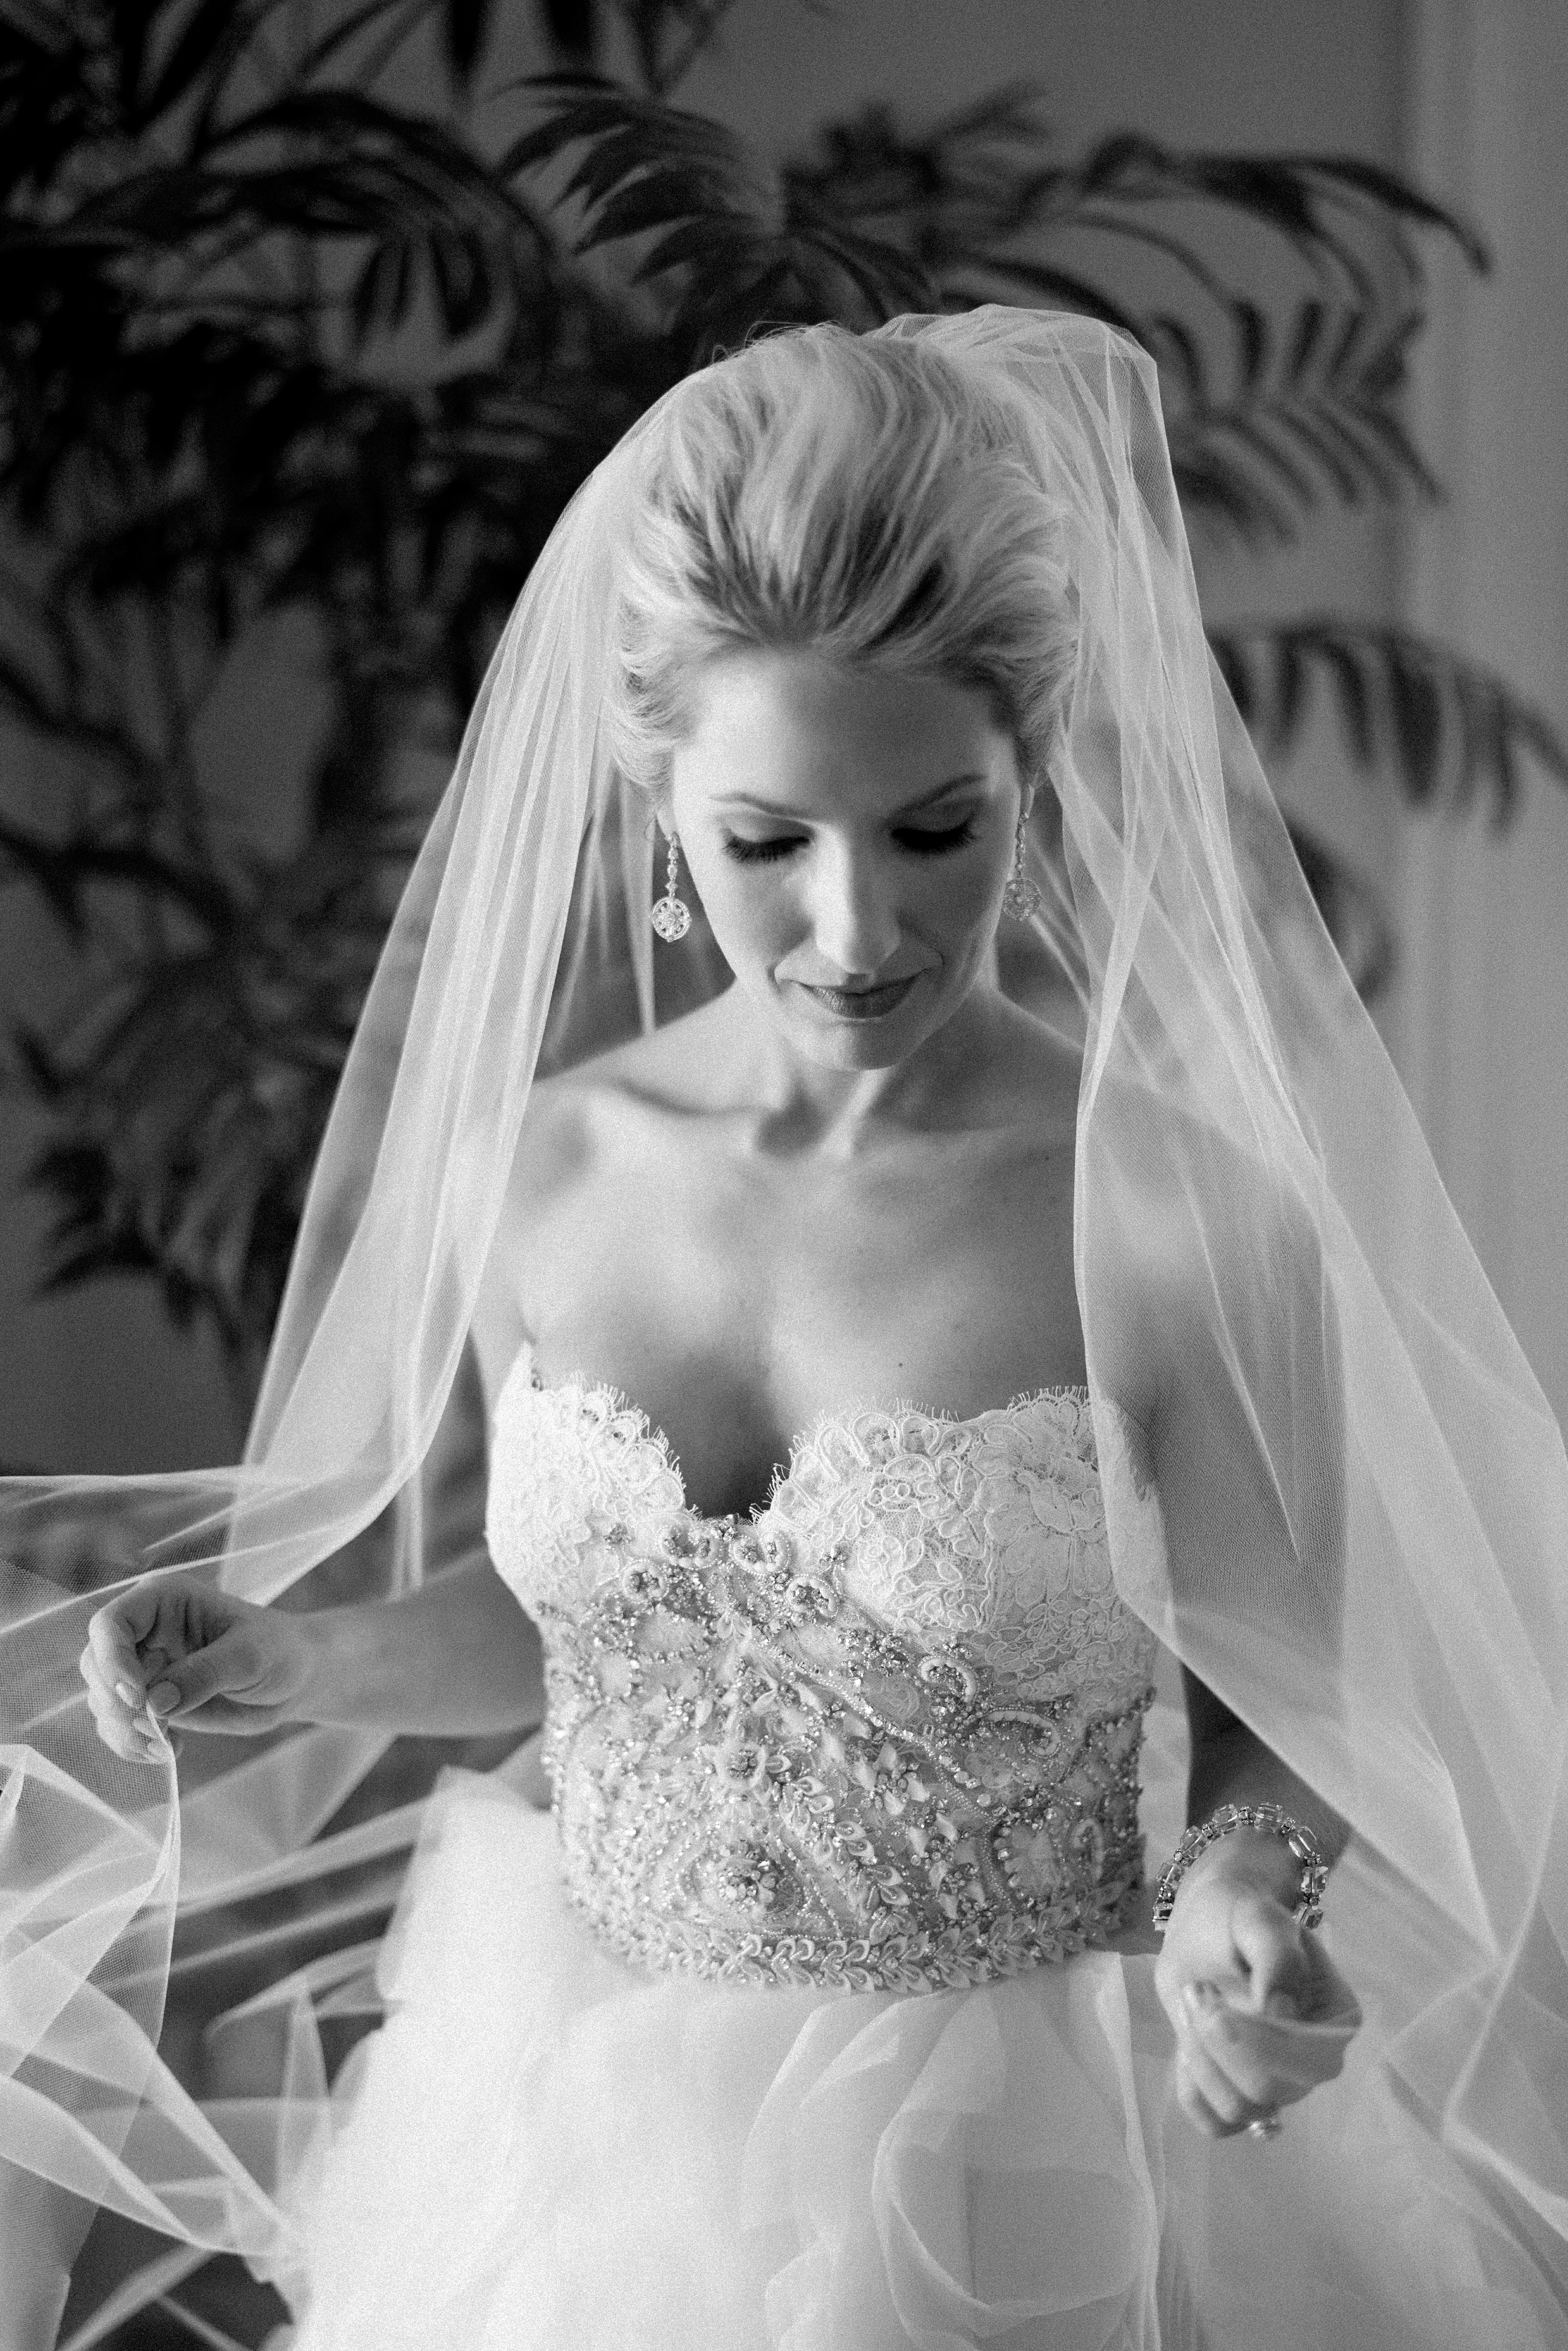 southern wedding traditions black and white bride photo